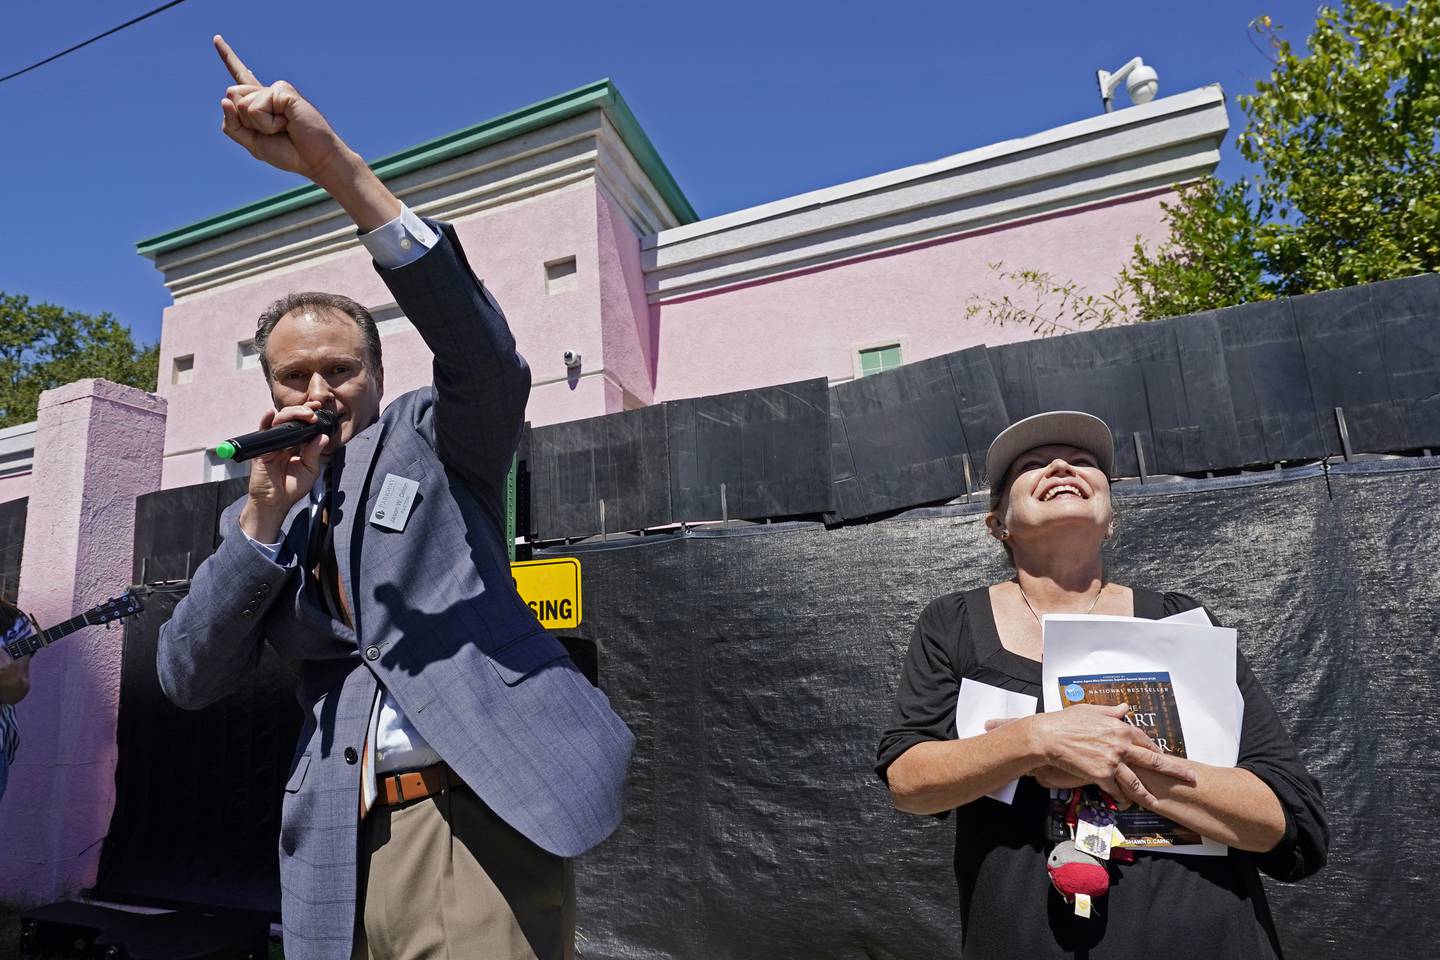 Pastor Jason Dillon of Parkway Pentecostal Church, left, delivers a closing prayer at an anti-abortion protest outside the Jackson Women's Health Organization clinic in Jackson, Miss., Wednesday, Sept. 22, 2021. The clinic is the state's only medical facility able to provide abortions on demand. Abortion rights opponents gathered outside the clinic and gave prayerful support to their cause. (AP Photo/Rogelio V. Solis)